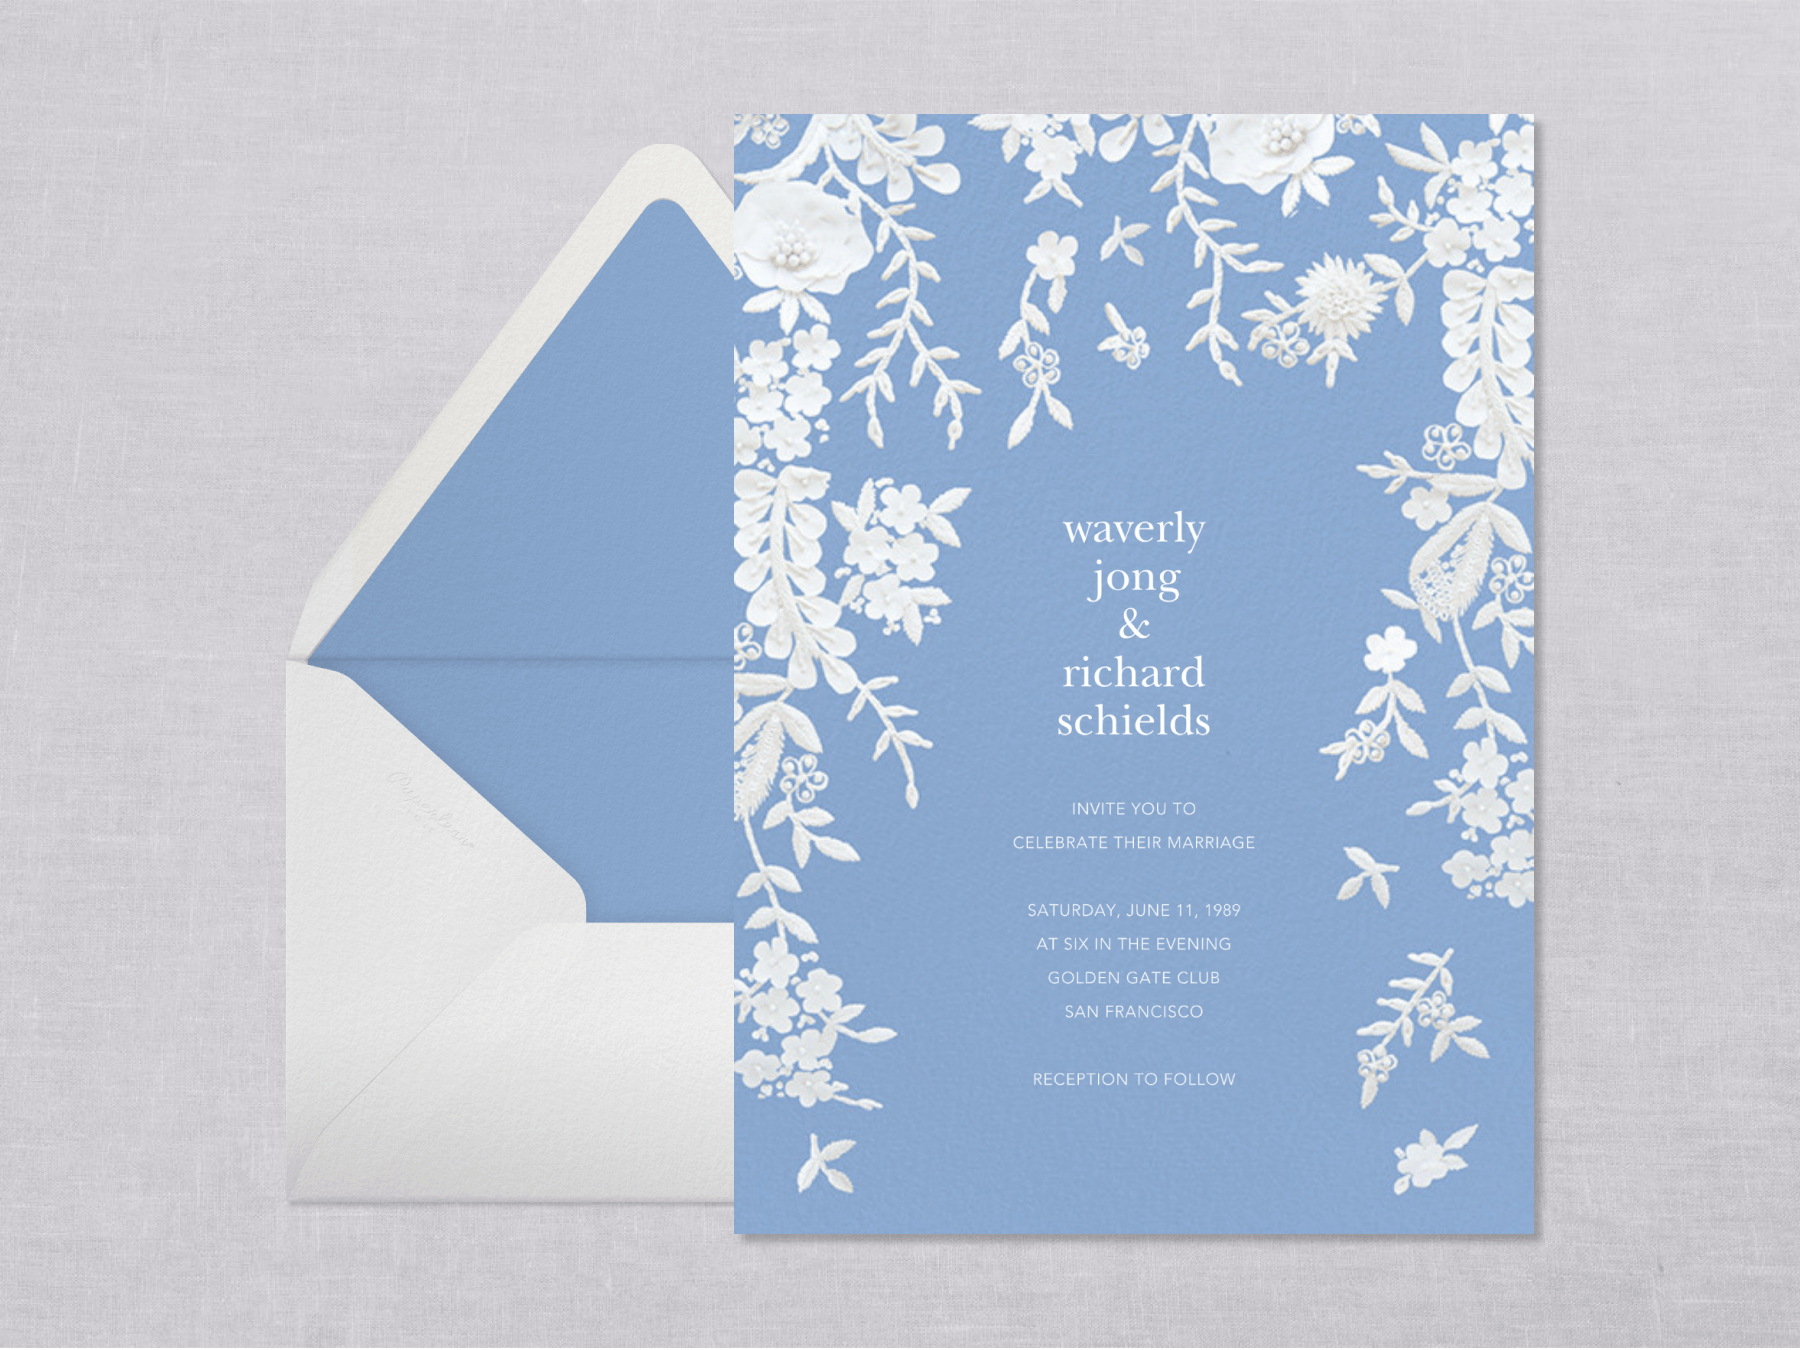 A periwinkle blue wedding invitation with white lace flowers tumbling down the edges beside a white envelope with blue liner on a gray cloth background.